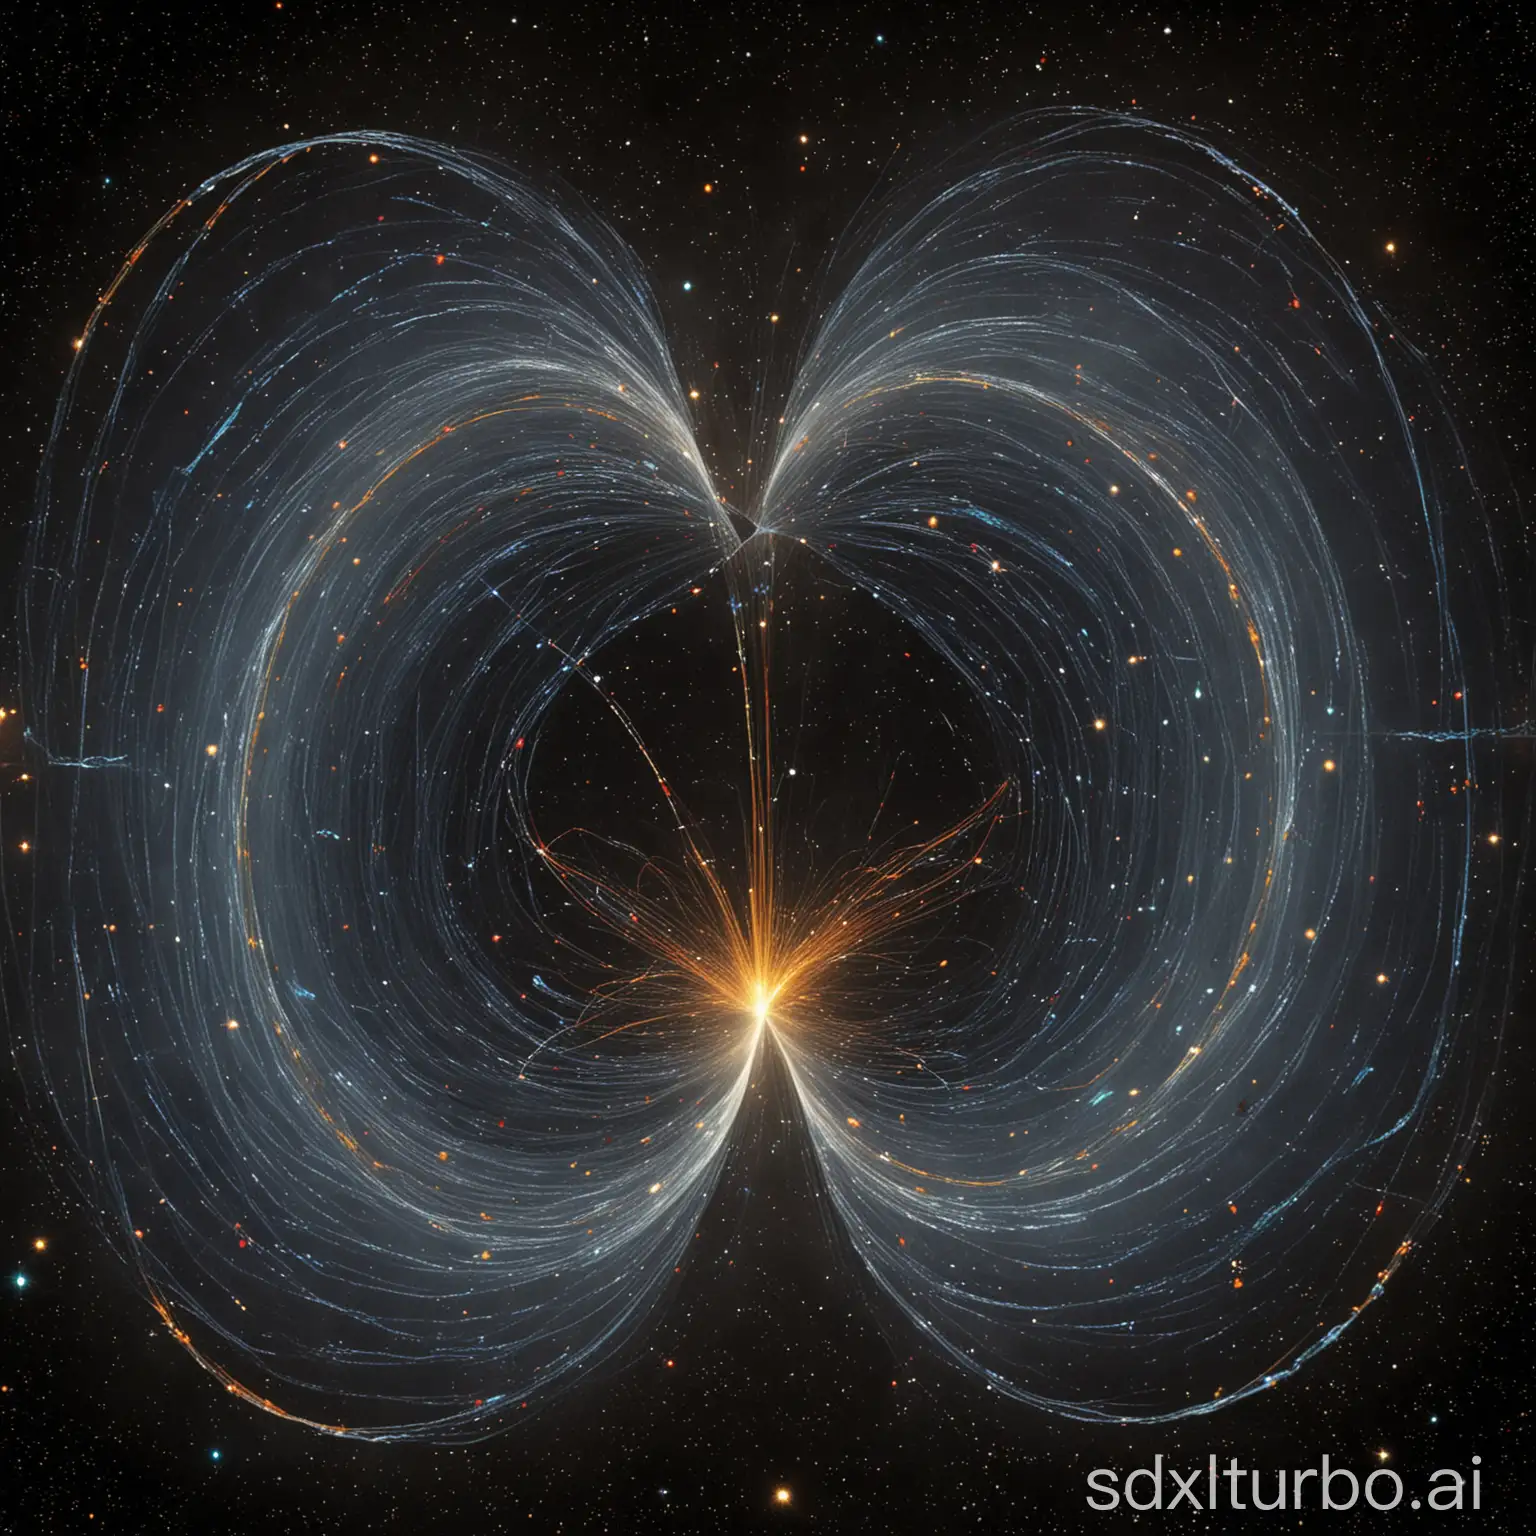 charged particles’ trajectories curvature and its radiation in the cosmic space, more density, bulk of trajectories in many directions, around many charge sources
